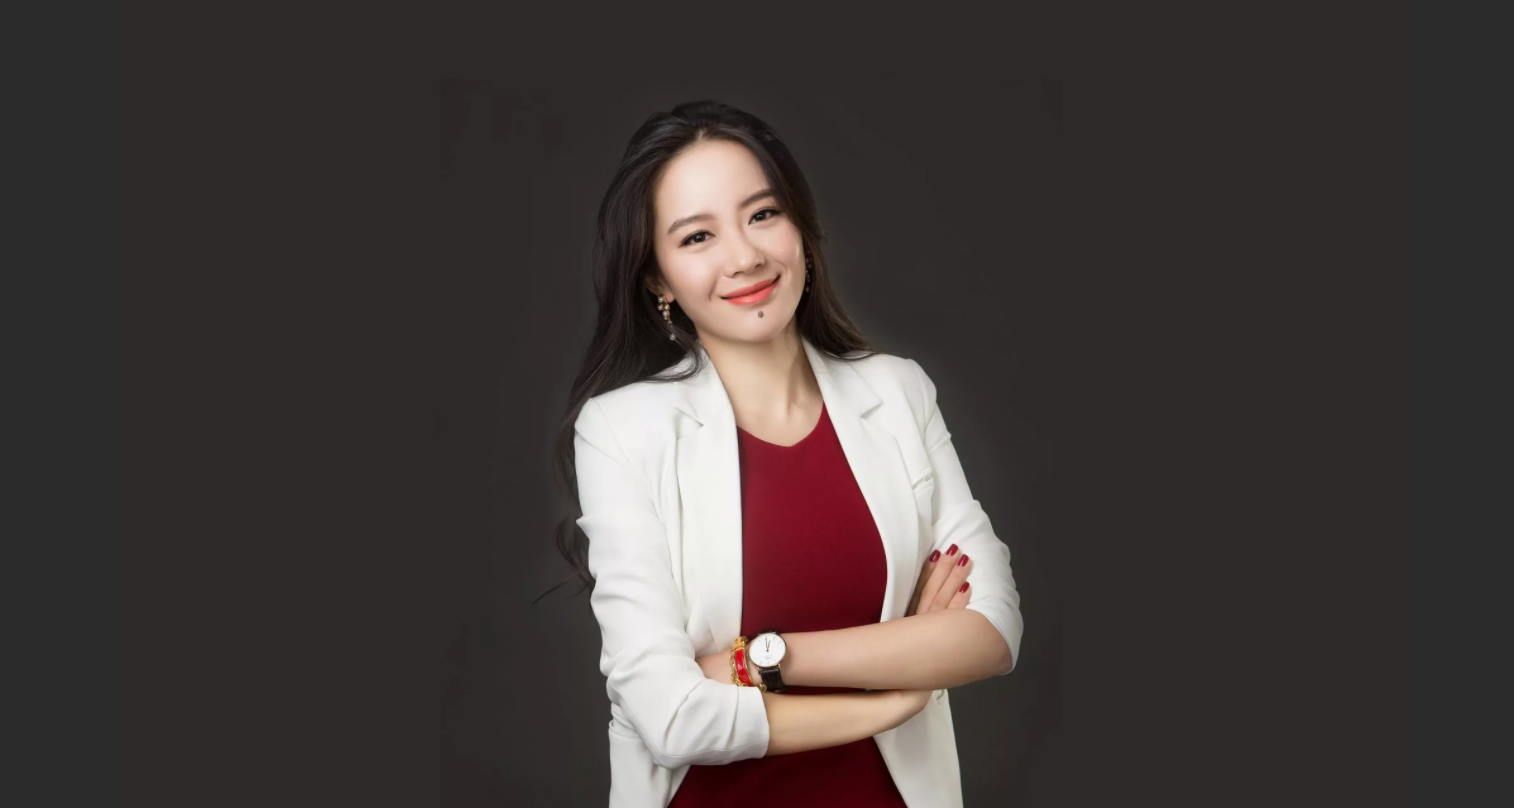 Interview with He Yi, co-founder and the CMO of Binance